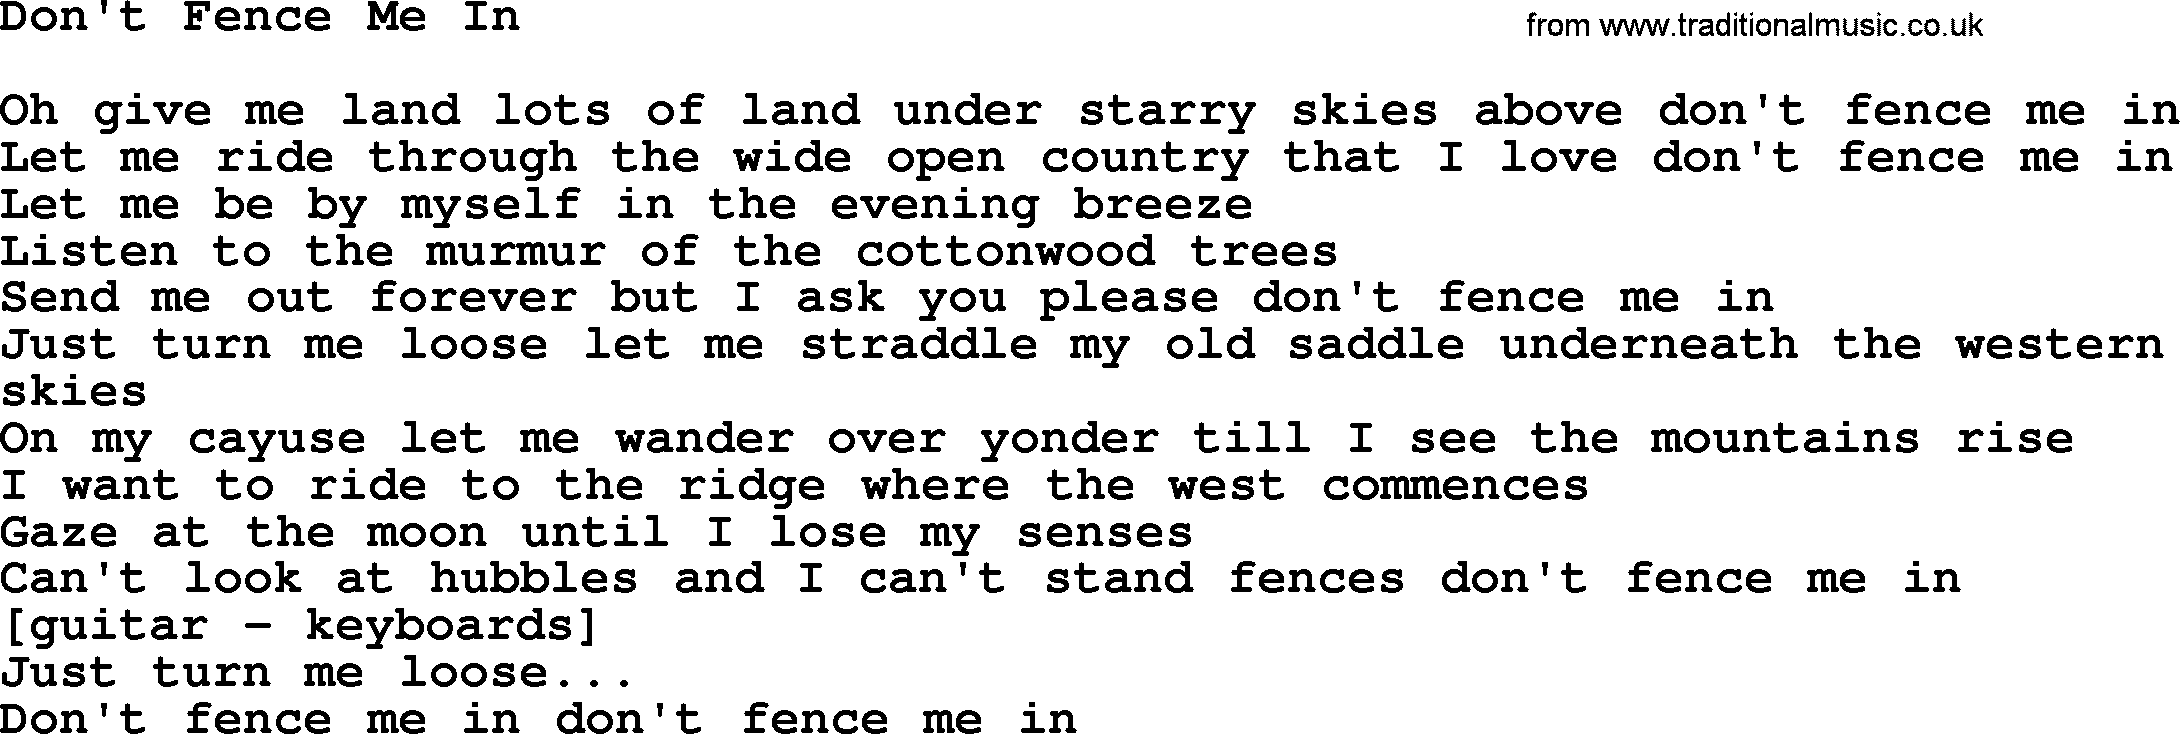 Willie Nelson song: Don't Fence Me In lyrics